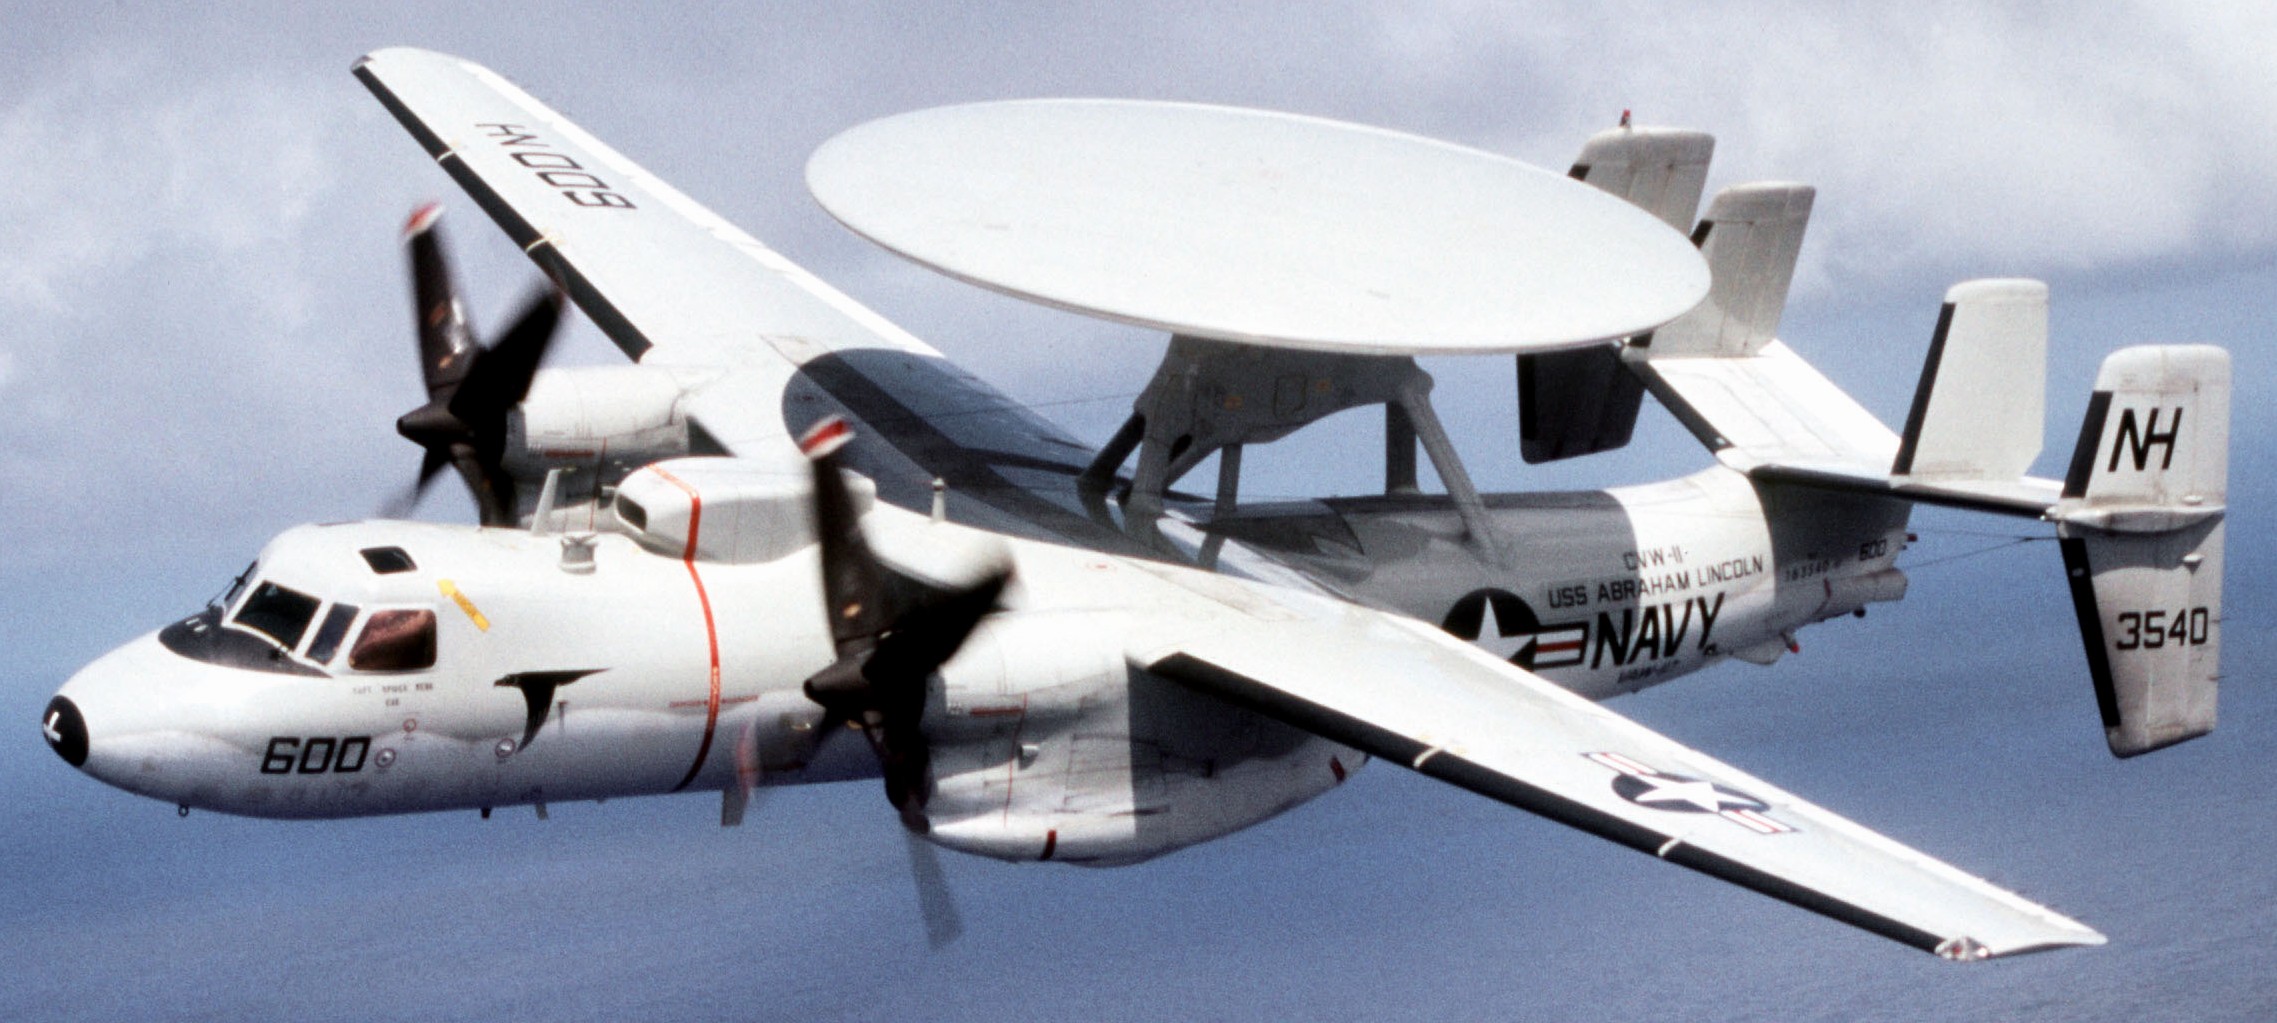 vaw-117 wallbangers carrier airborne early warning squadron navy e-2c hawkeye cvw-11 uss abraham lincoln cvn-72 92